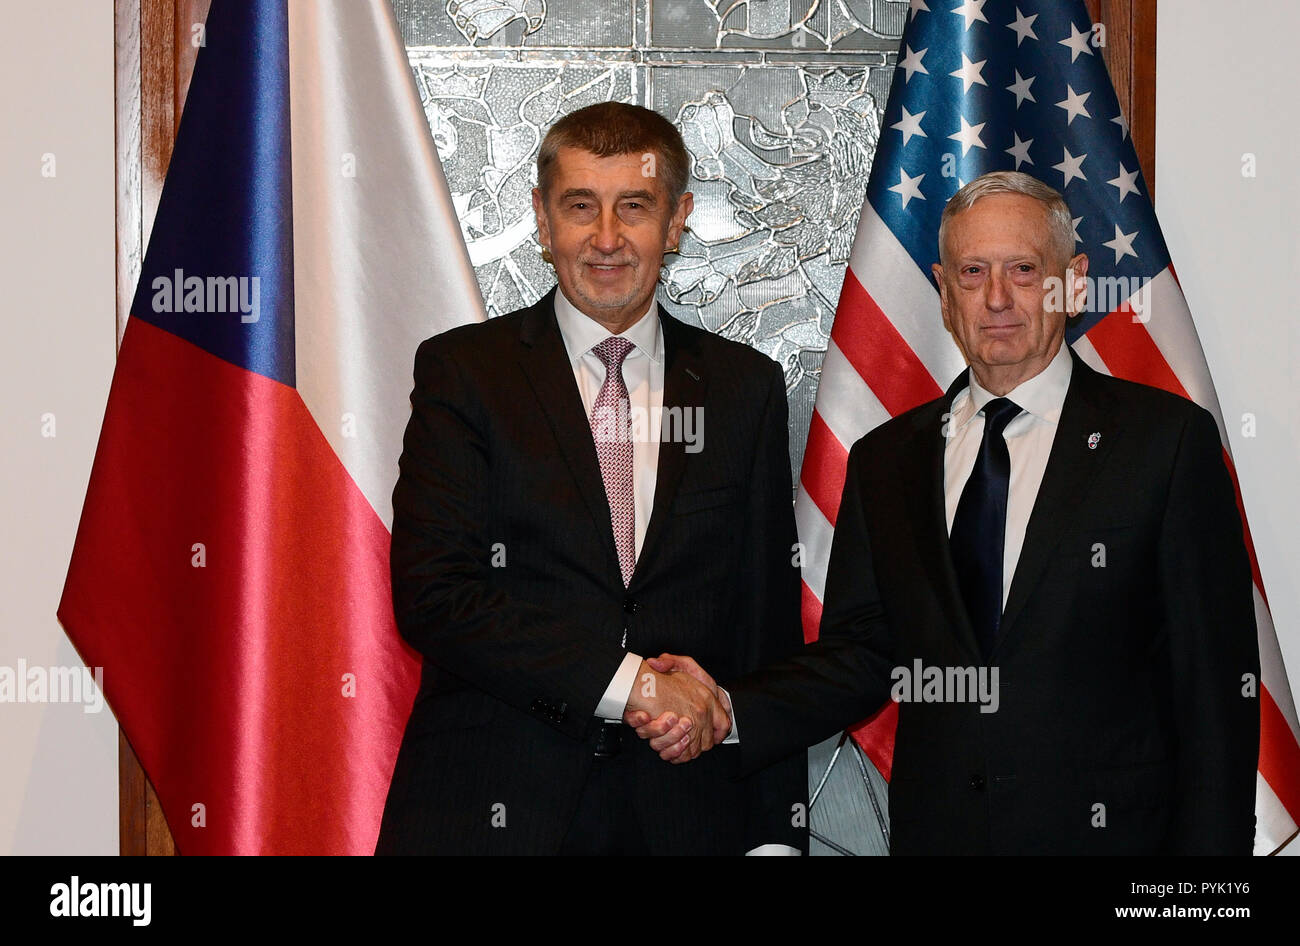 Prague, Czech Republic. 28th Oct, 2018. U.S. Defense Secretary Jim Mattis, left, handshake with Czech Prime Minister Andrej Babis, right, during their meeting in Prague, Czech Republic, Sunday, October 28, 2018. Mattis arrives in Prague to mark the 100th anniversary of the 1918 creation of the Czechoslovak state. Credit: Roman Vondrous/CTK Photo/Alamy Live News Stock Photo